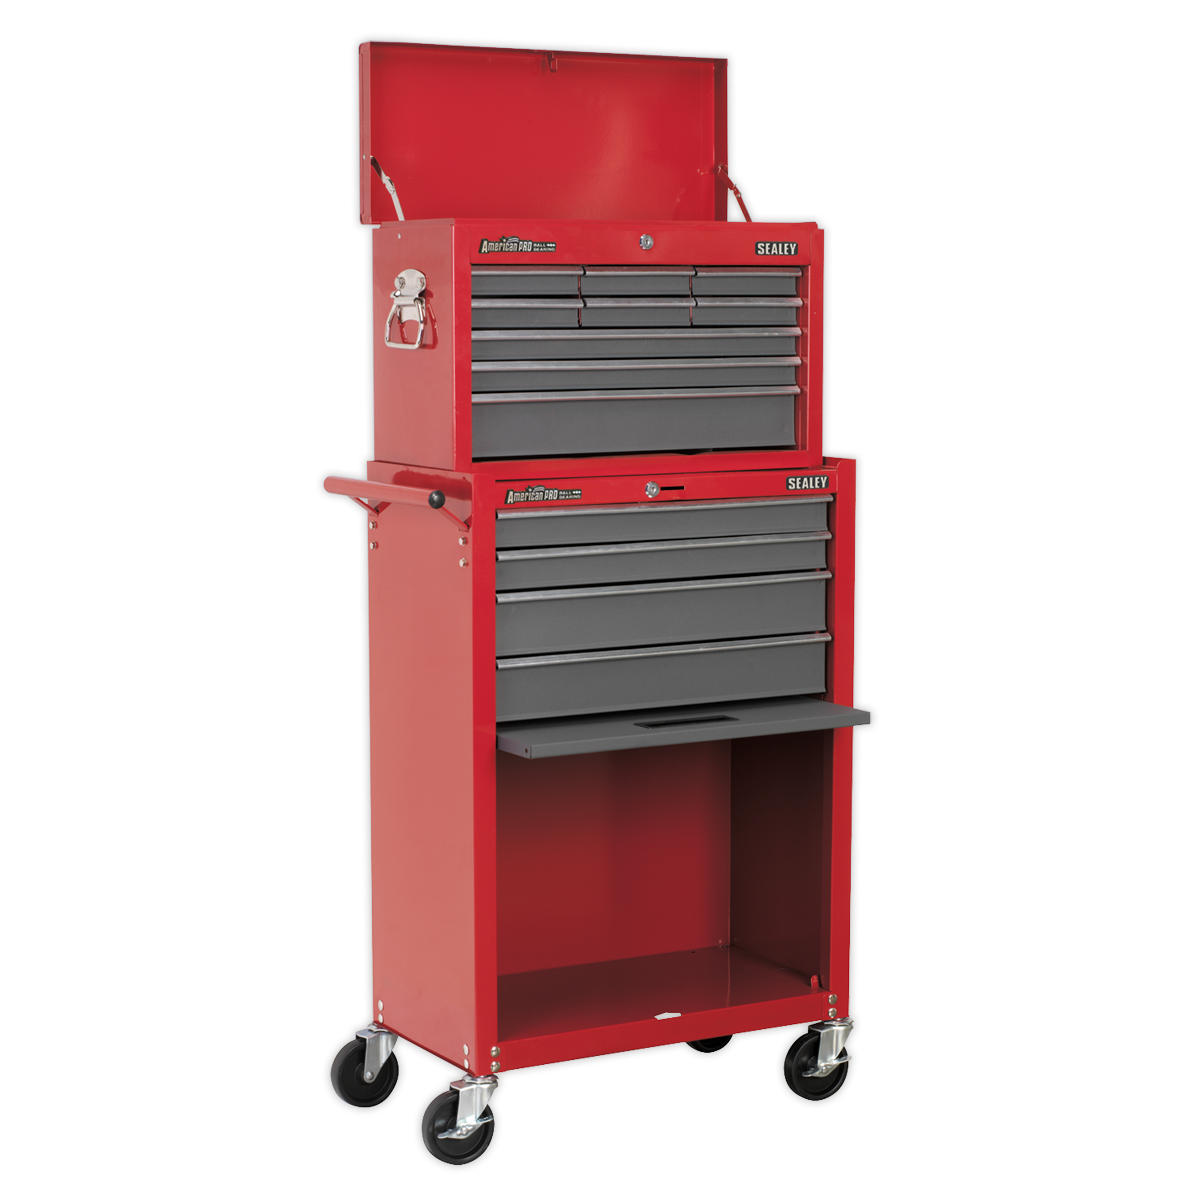 Sealey 13 Drawer Topchest & Rollcab Combination with Ball-Bearing Slides - Red/Grey AP22513BB